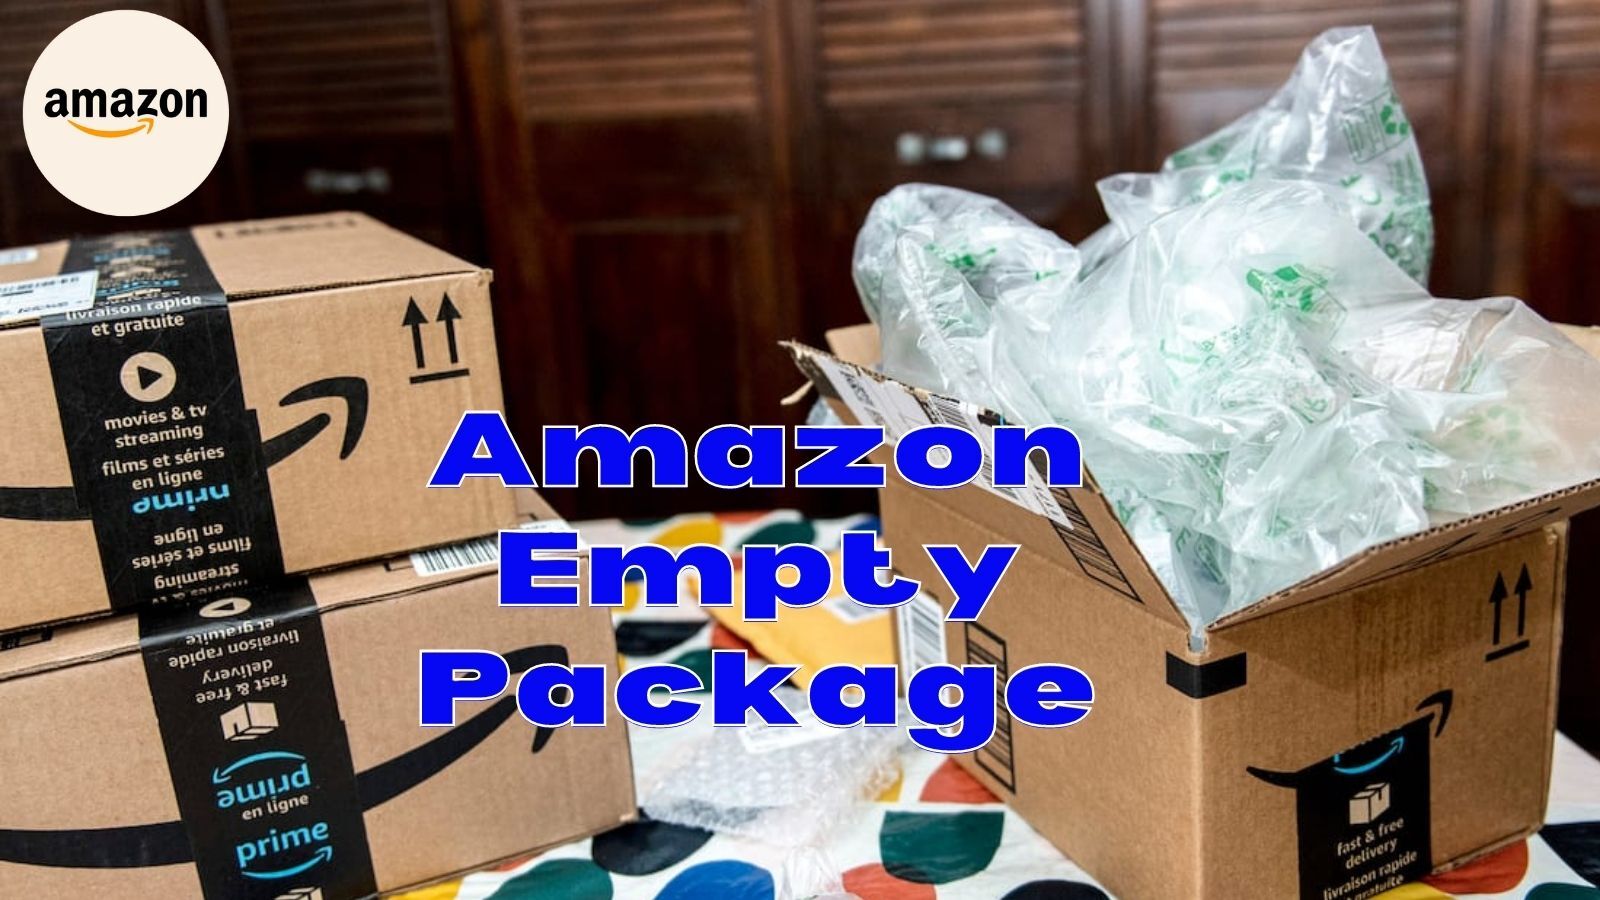 Amazon Empty Package: Why and What Should You Do?